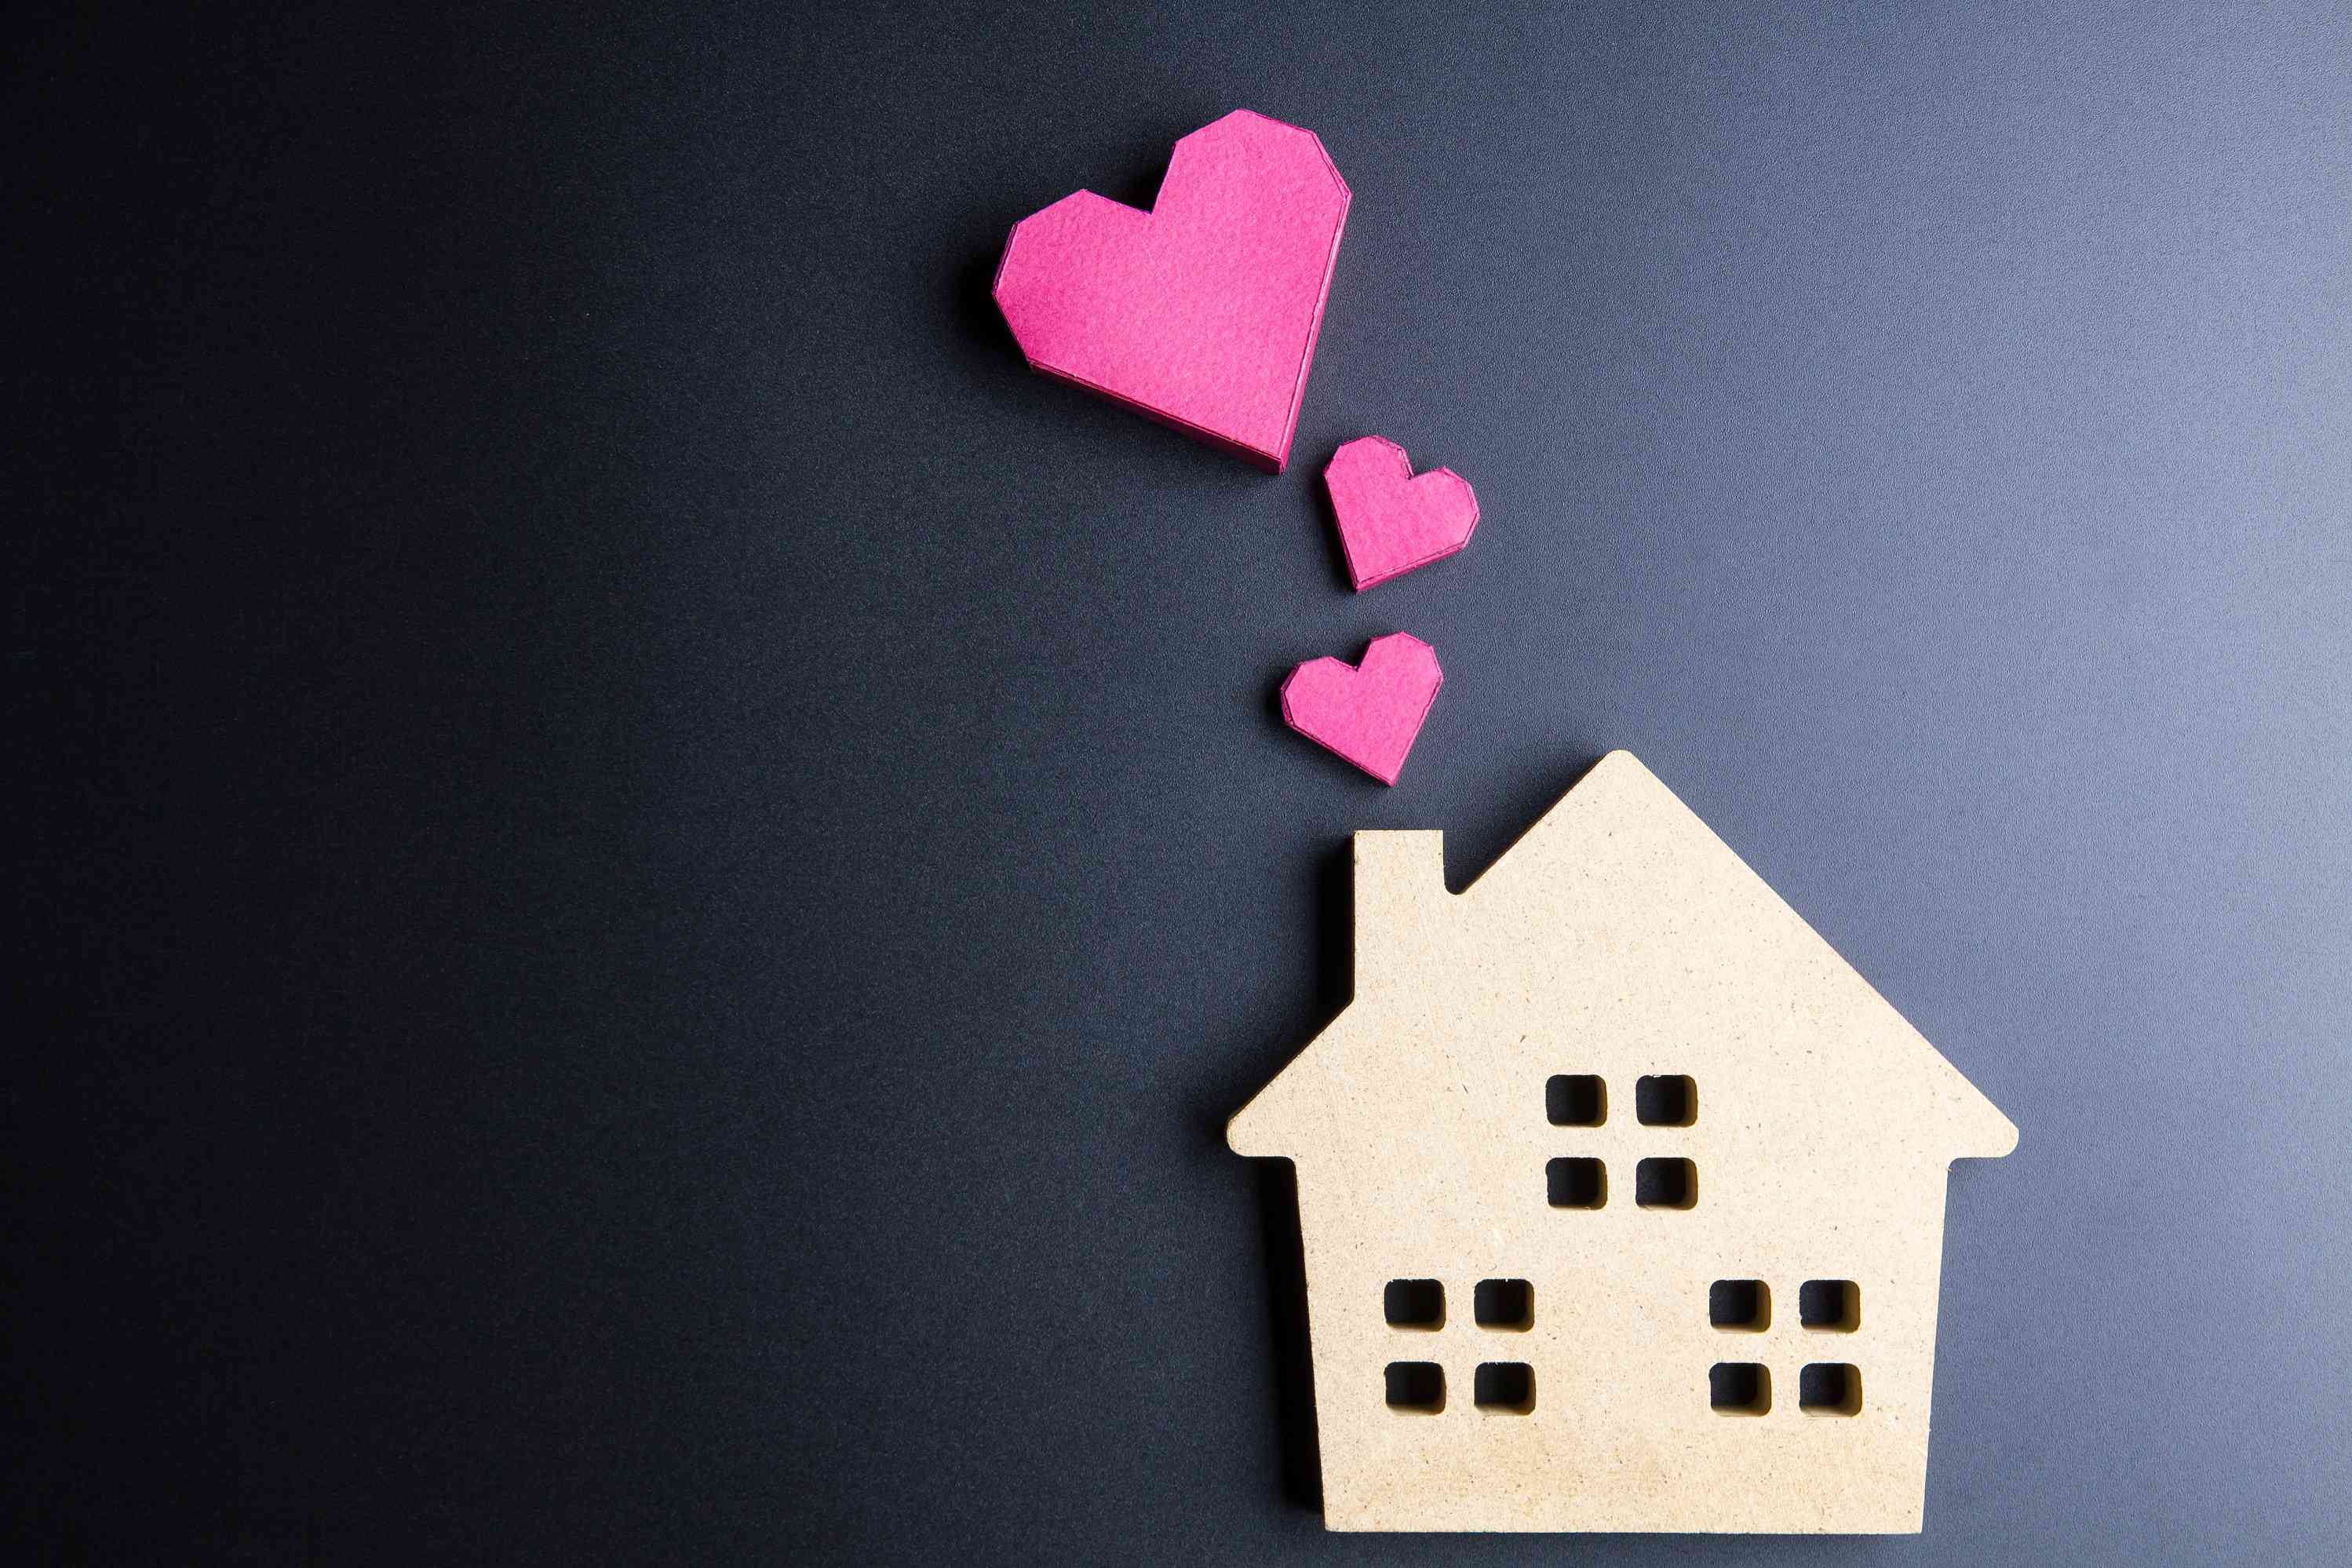 House with hearts indicating love in the home